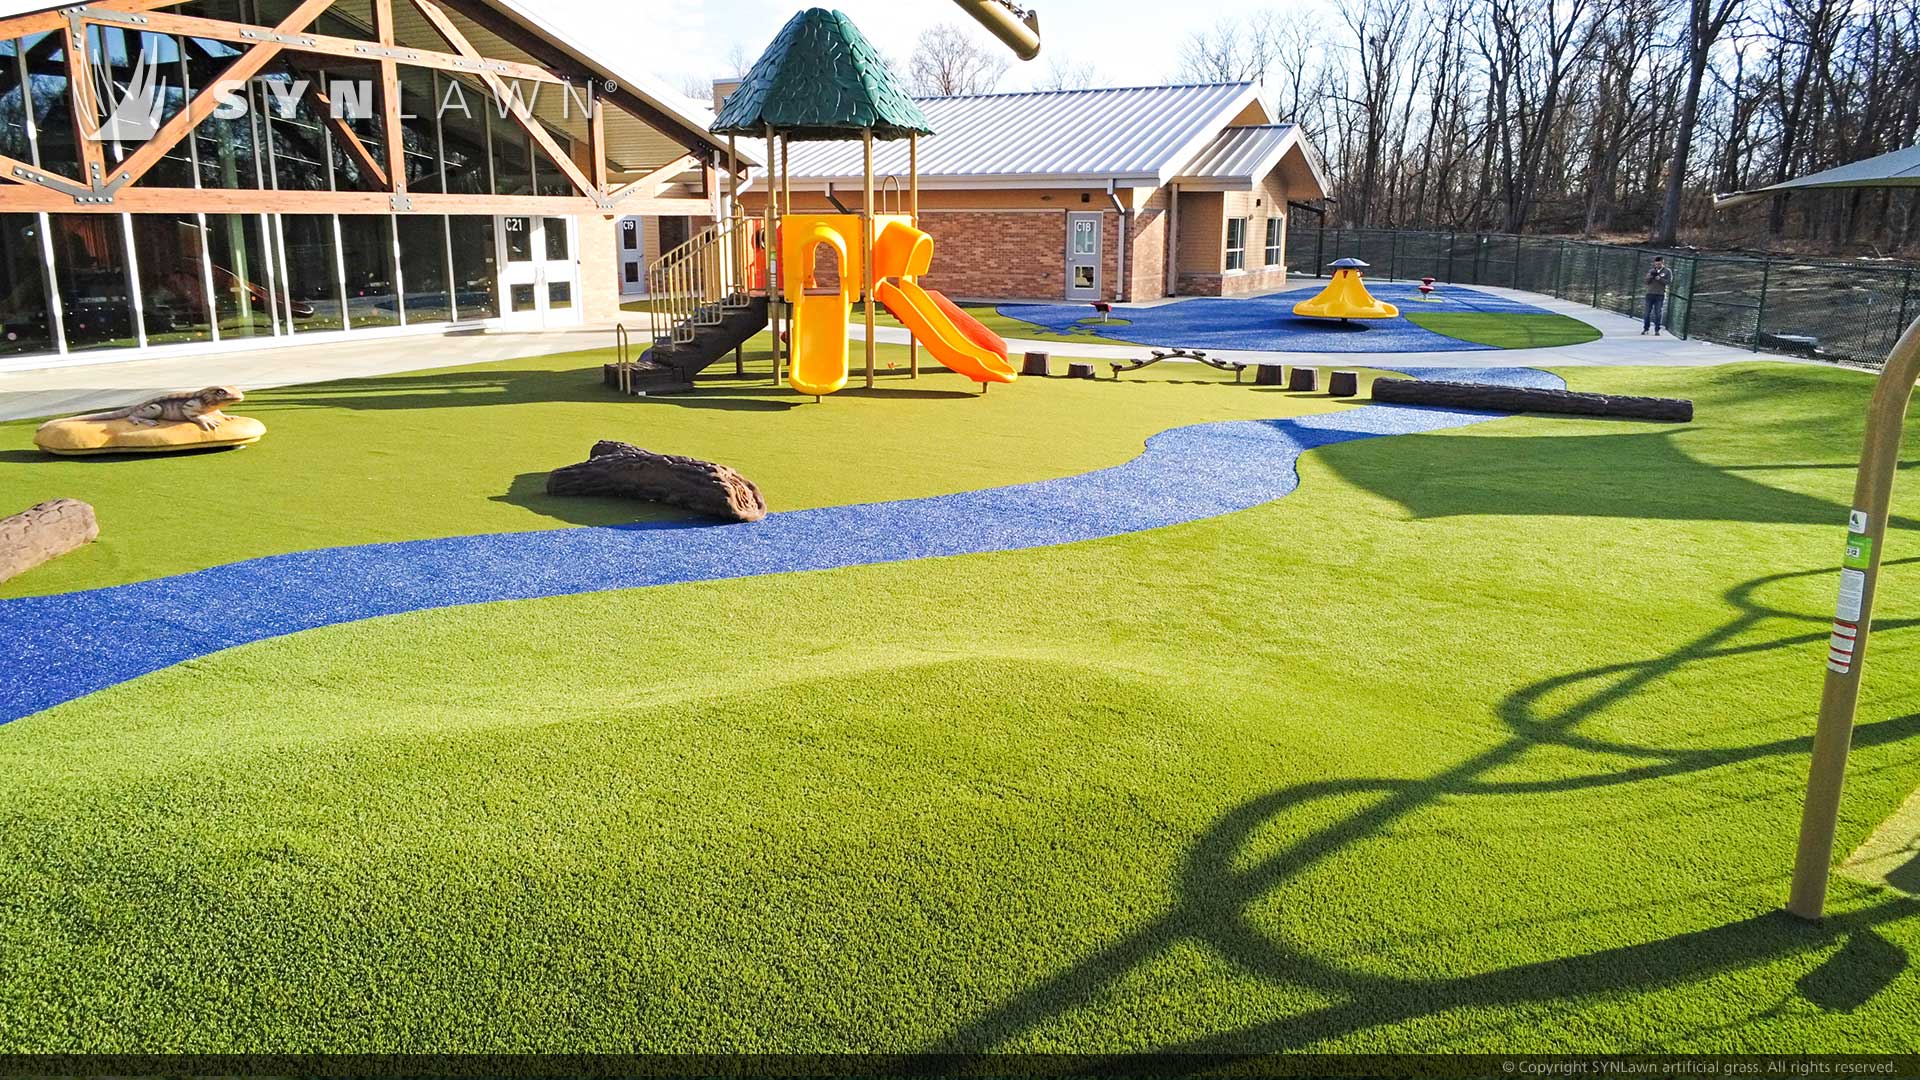 image of synlawn artificial grass at liggett trails early education center featuring colored artificial turf